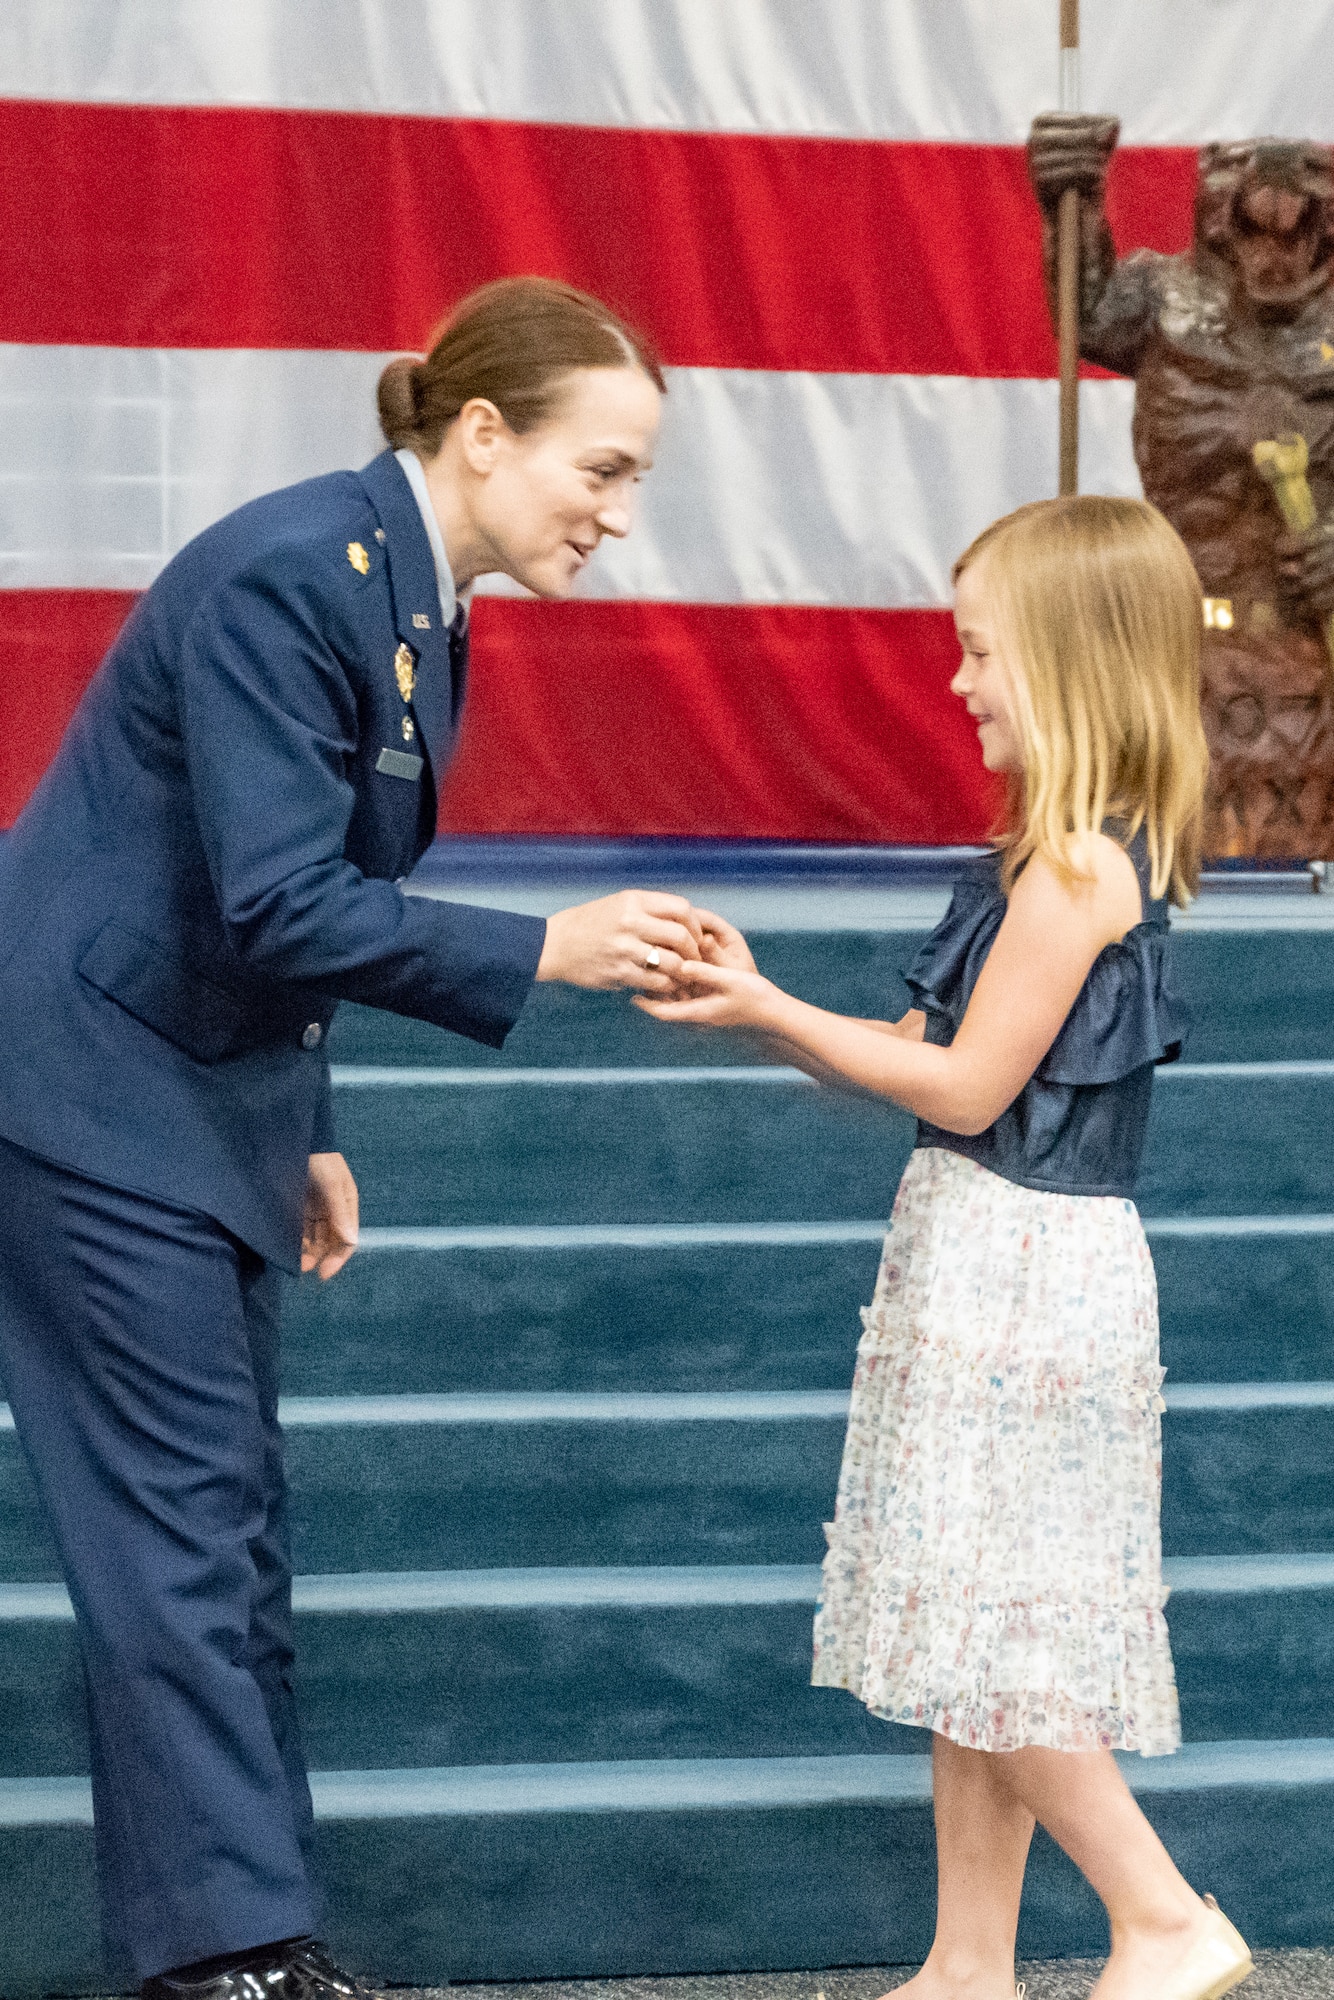 U.S. Air Force Maj. Jessica Oberlander, 707th Maintenance Squadron commander, speaks with her daughter, Lillian, at Barksdale Air Force Base, Louisiana, August 5, 2018.  Oberlander took command of the unit during a ceremony attended by 307th Bomb Wing leadership and other Airmen from around the unit.  (U.S. Air Force photo by Technical Sgt. Cody Burt/Released)